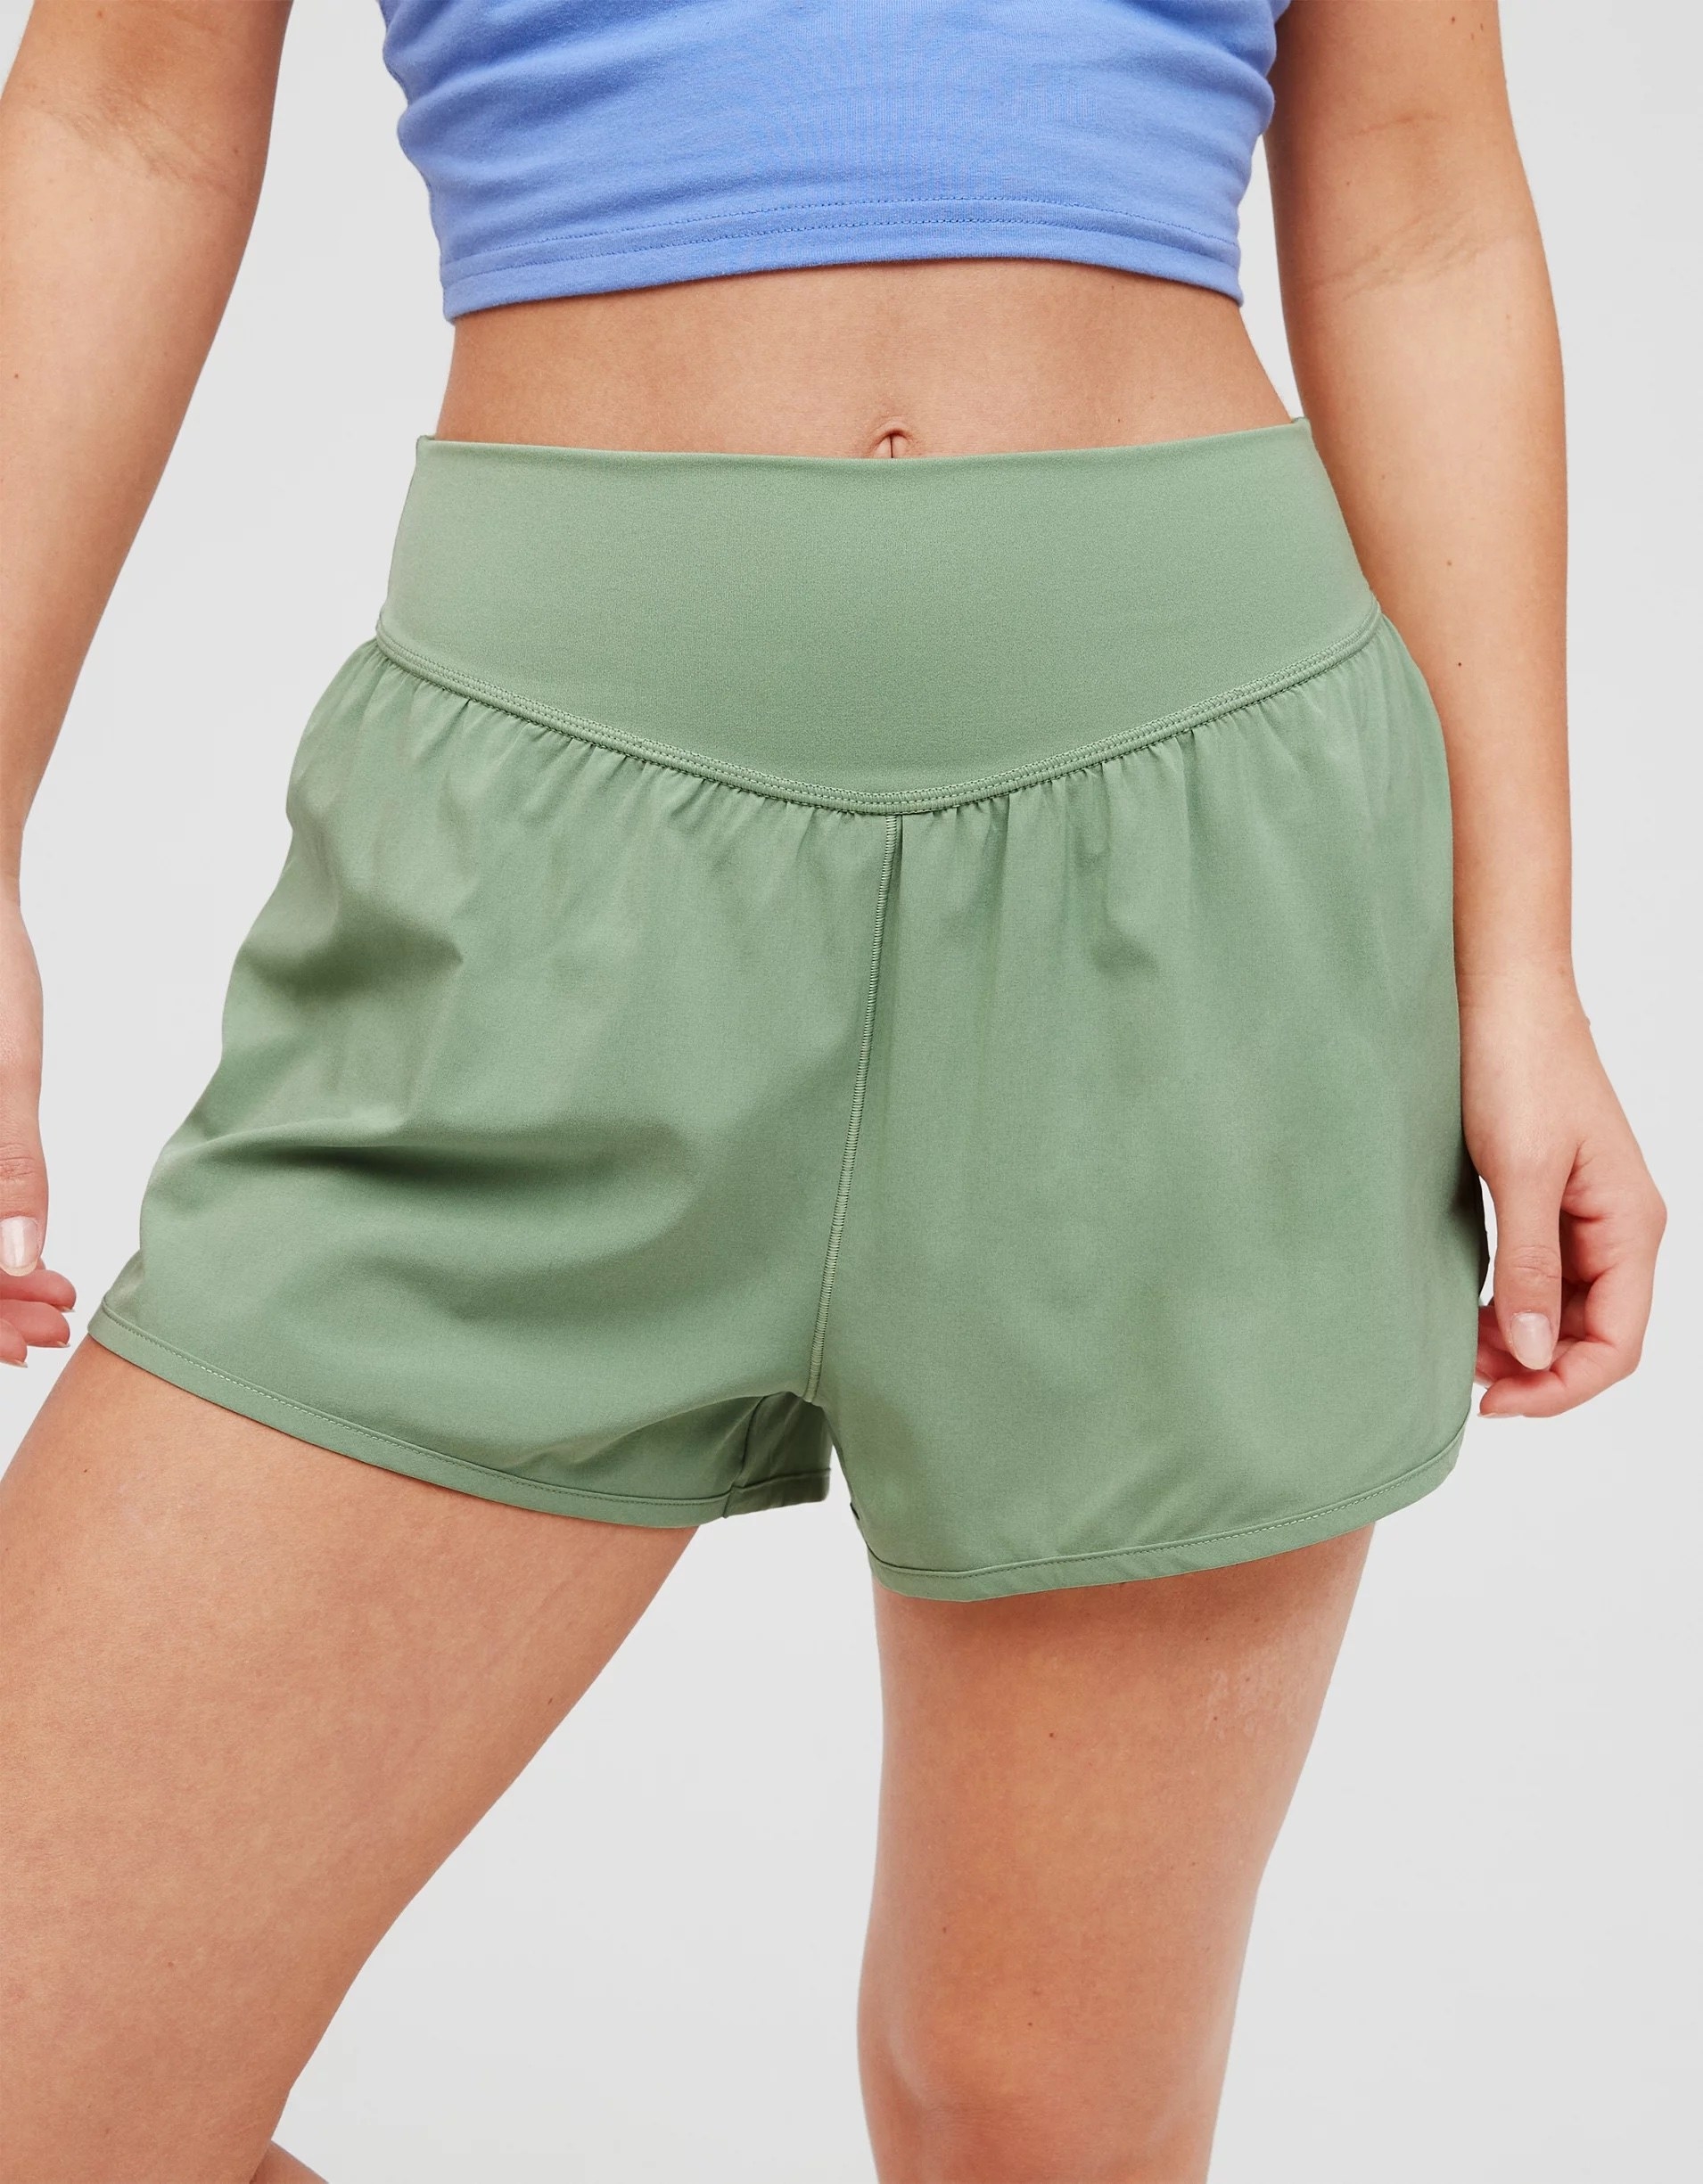 model wearing the shorts in green